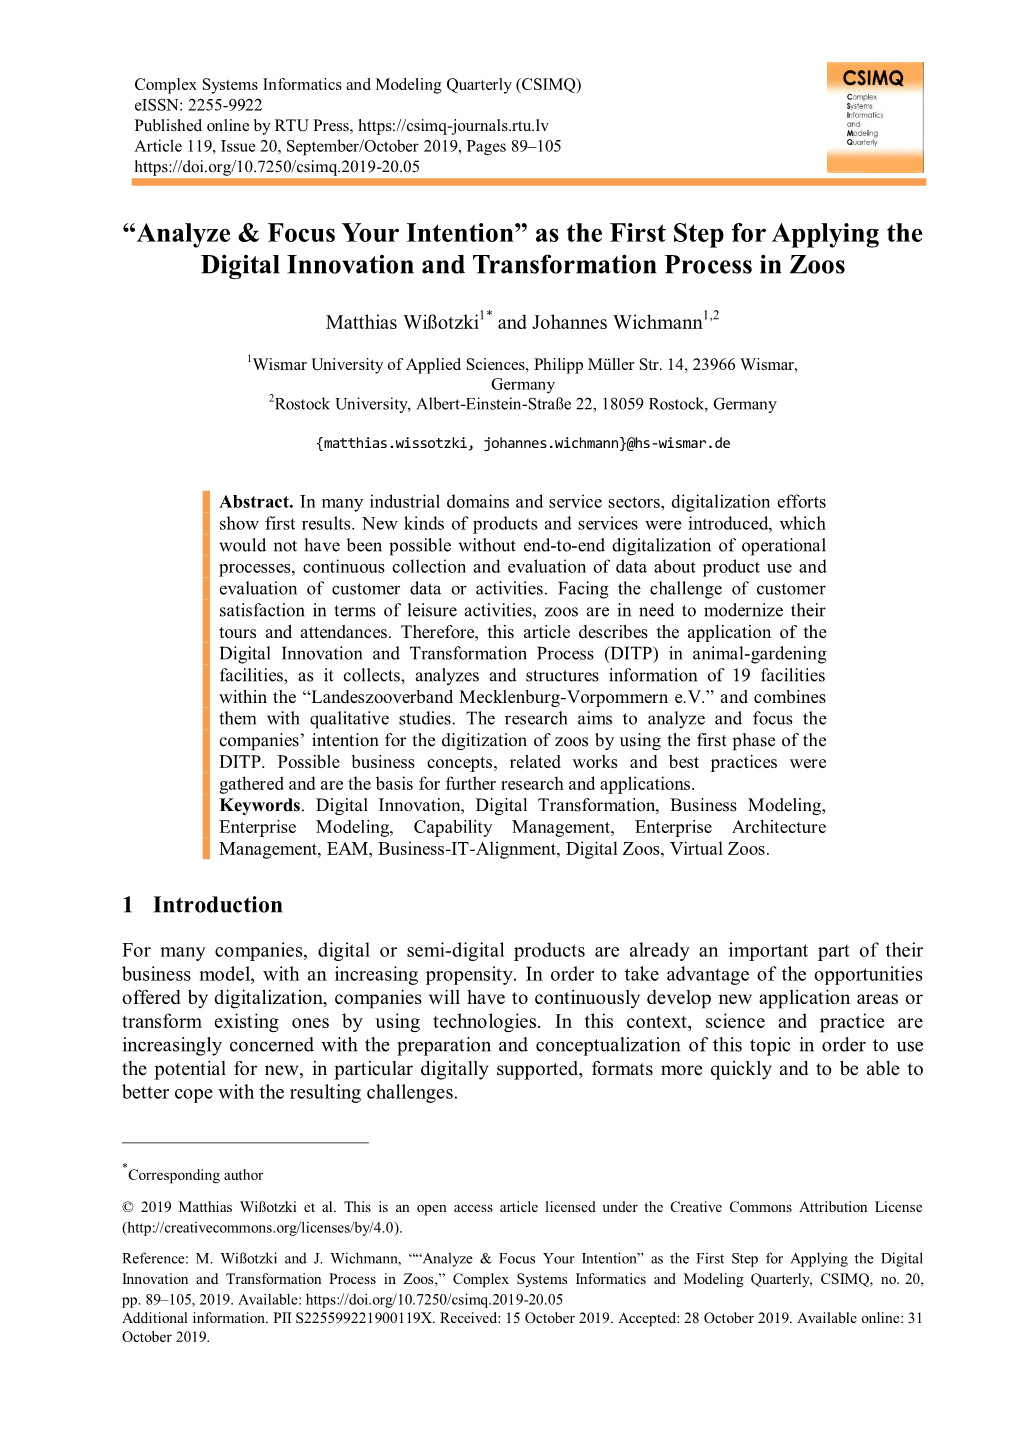 As the First Step for Applying the Digital Innovation and Transformation Process in Zoos